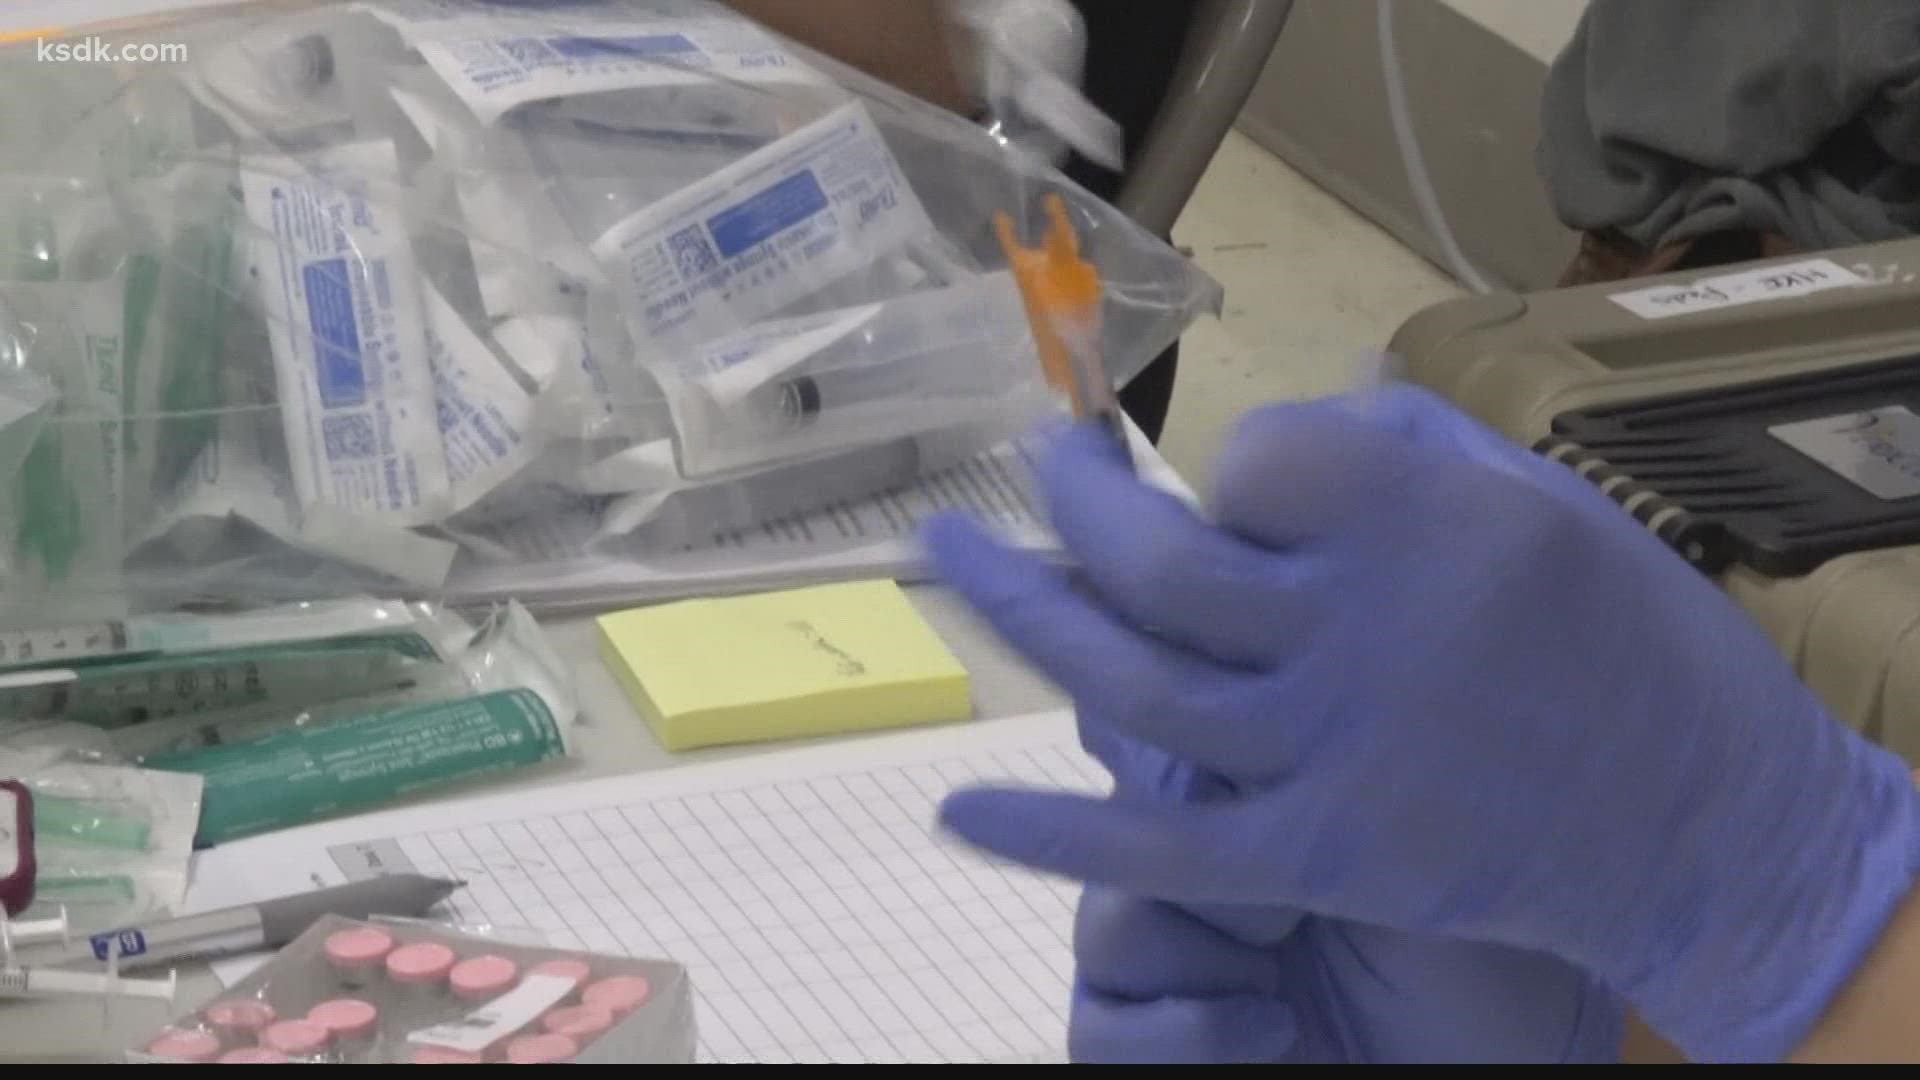 St. Louis County leads the state in child COVID-19 vaccinations.